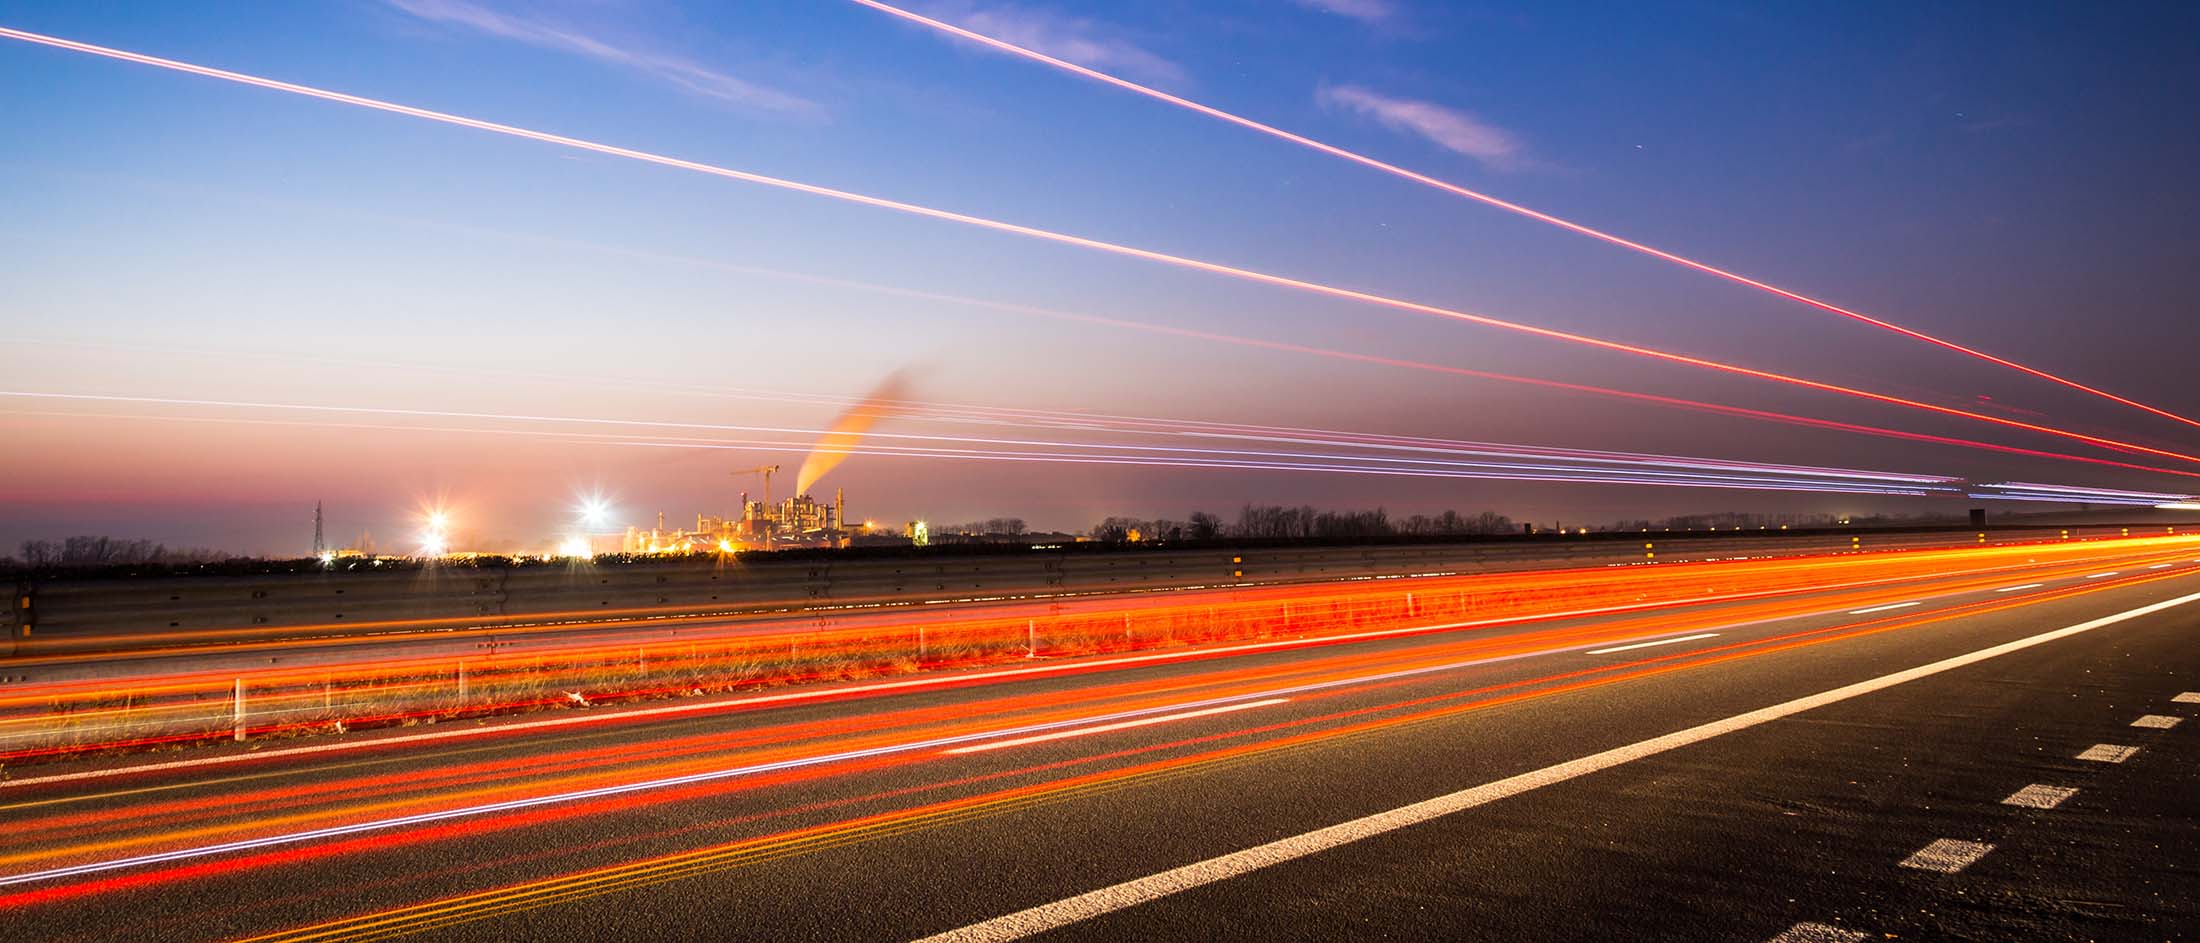 Long exposure of traffic on highway next to industrial processing facility.